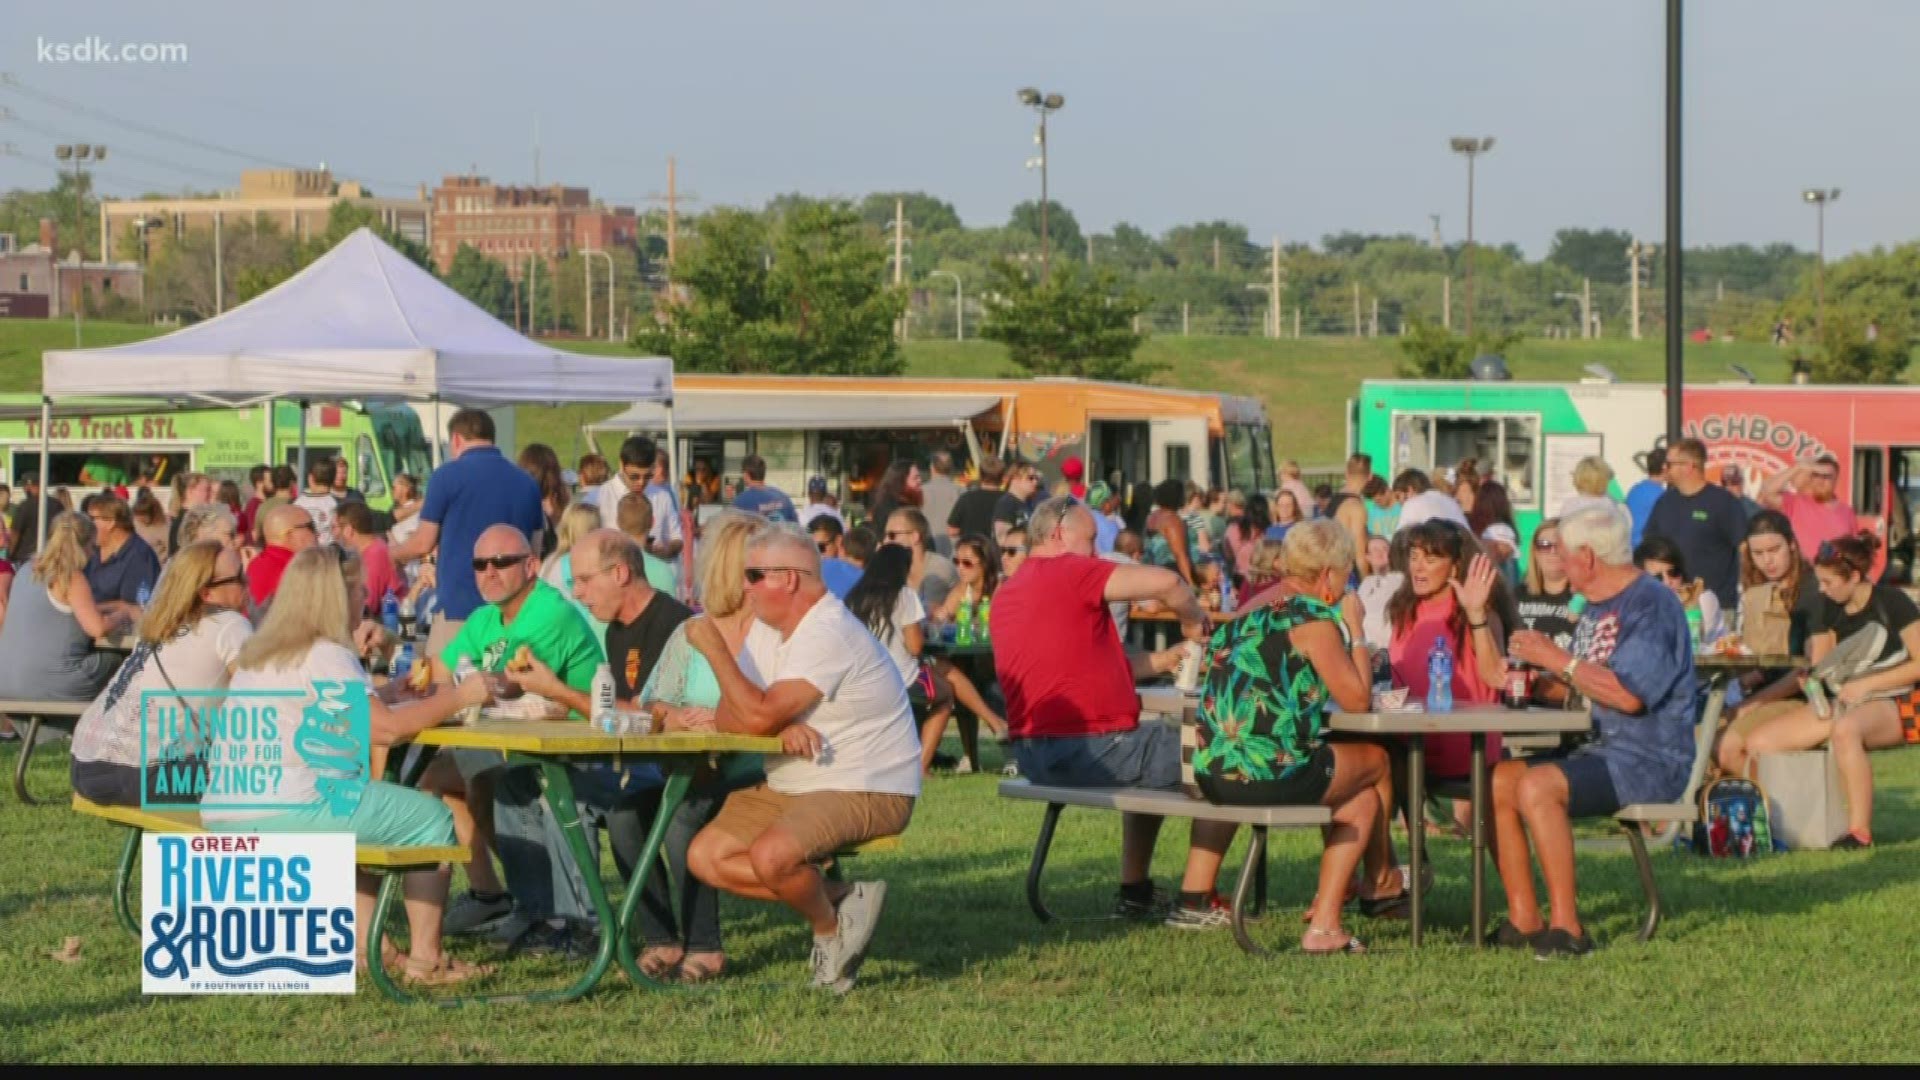 Head to Alton, Illinois to end your summer with tons of food and fun!